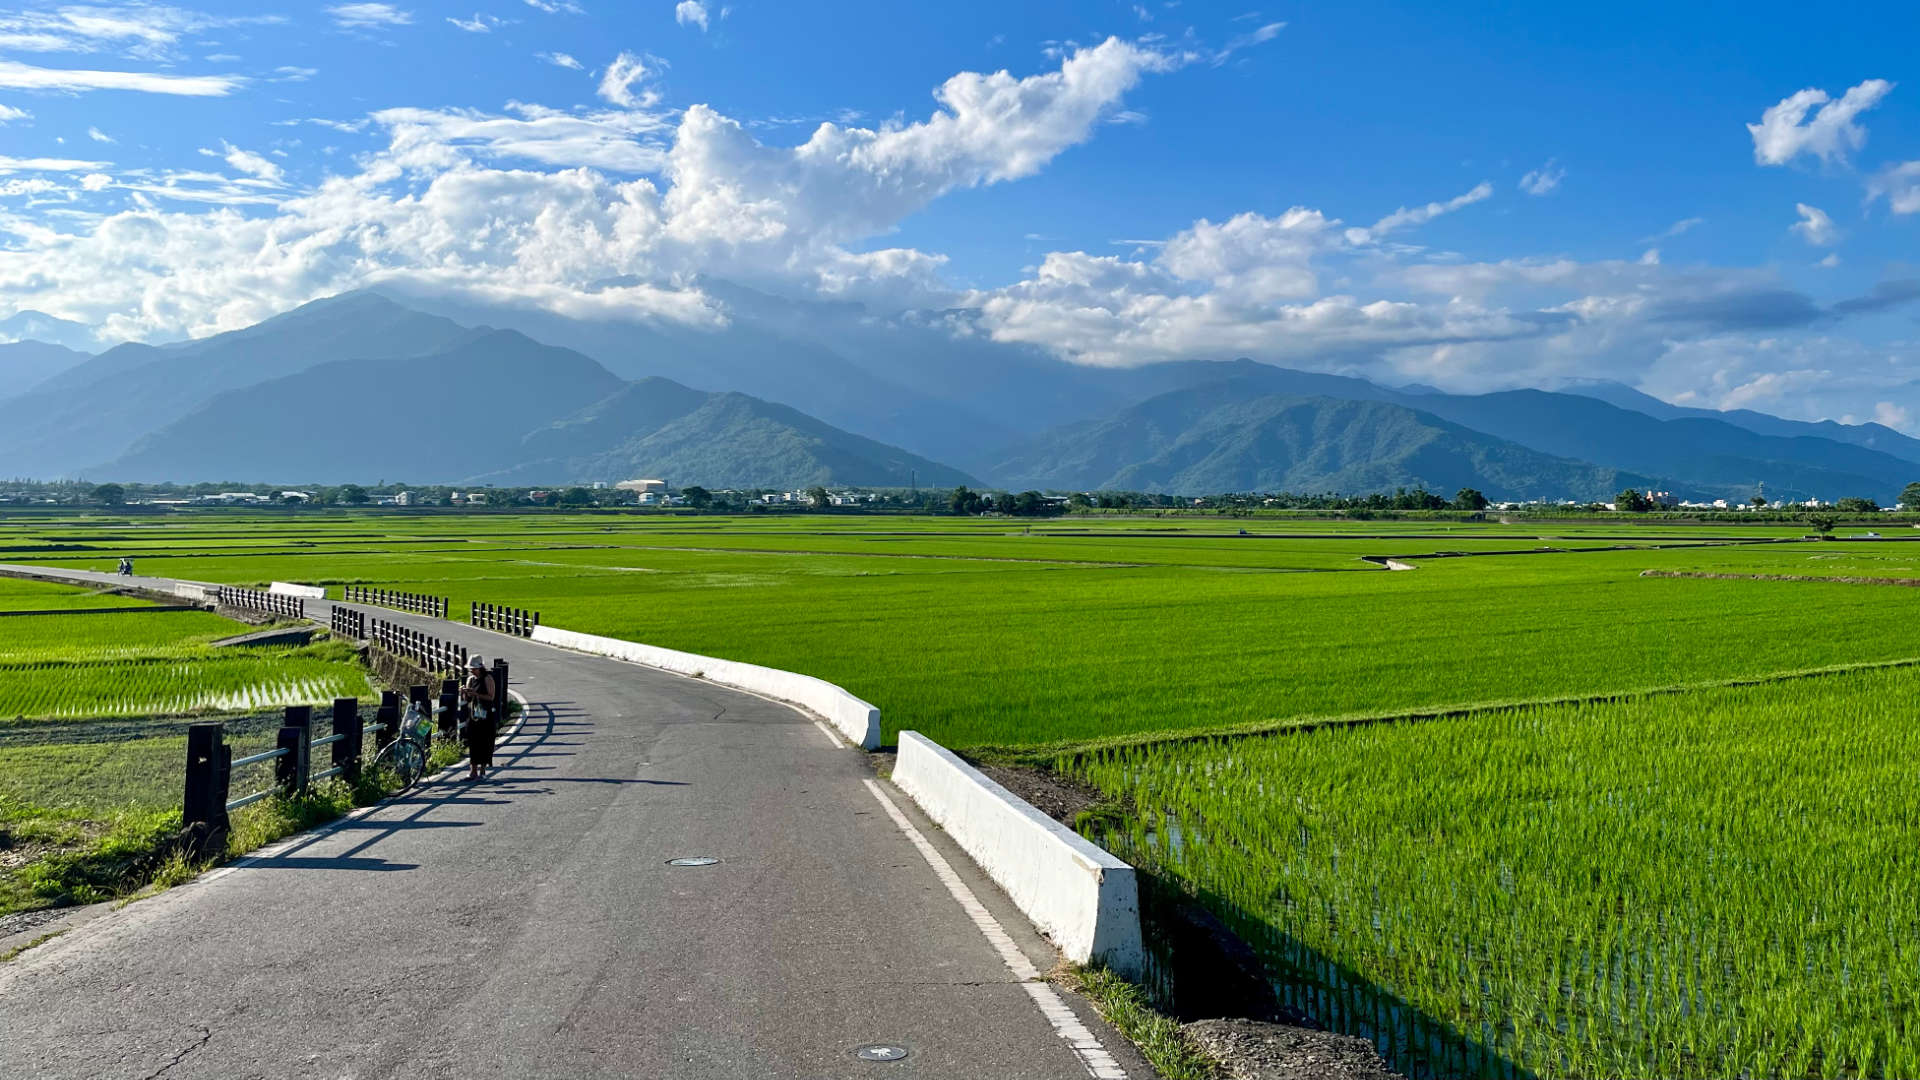 A wide flat valley, with vibrant rice fields stretching to distant mountains. A near-empty road leads through the fields. In the foreground, a lady has parked her bicycle and is looking at her phone.